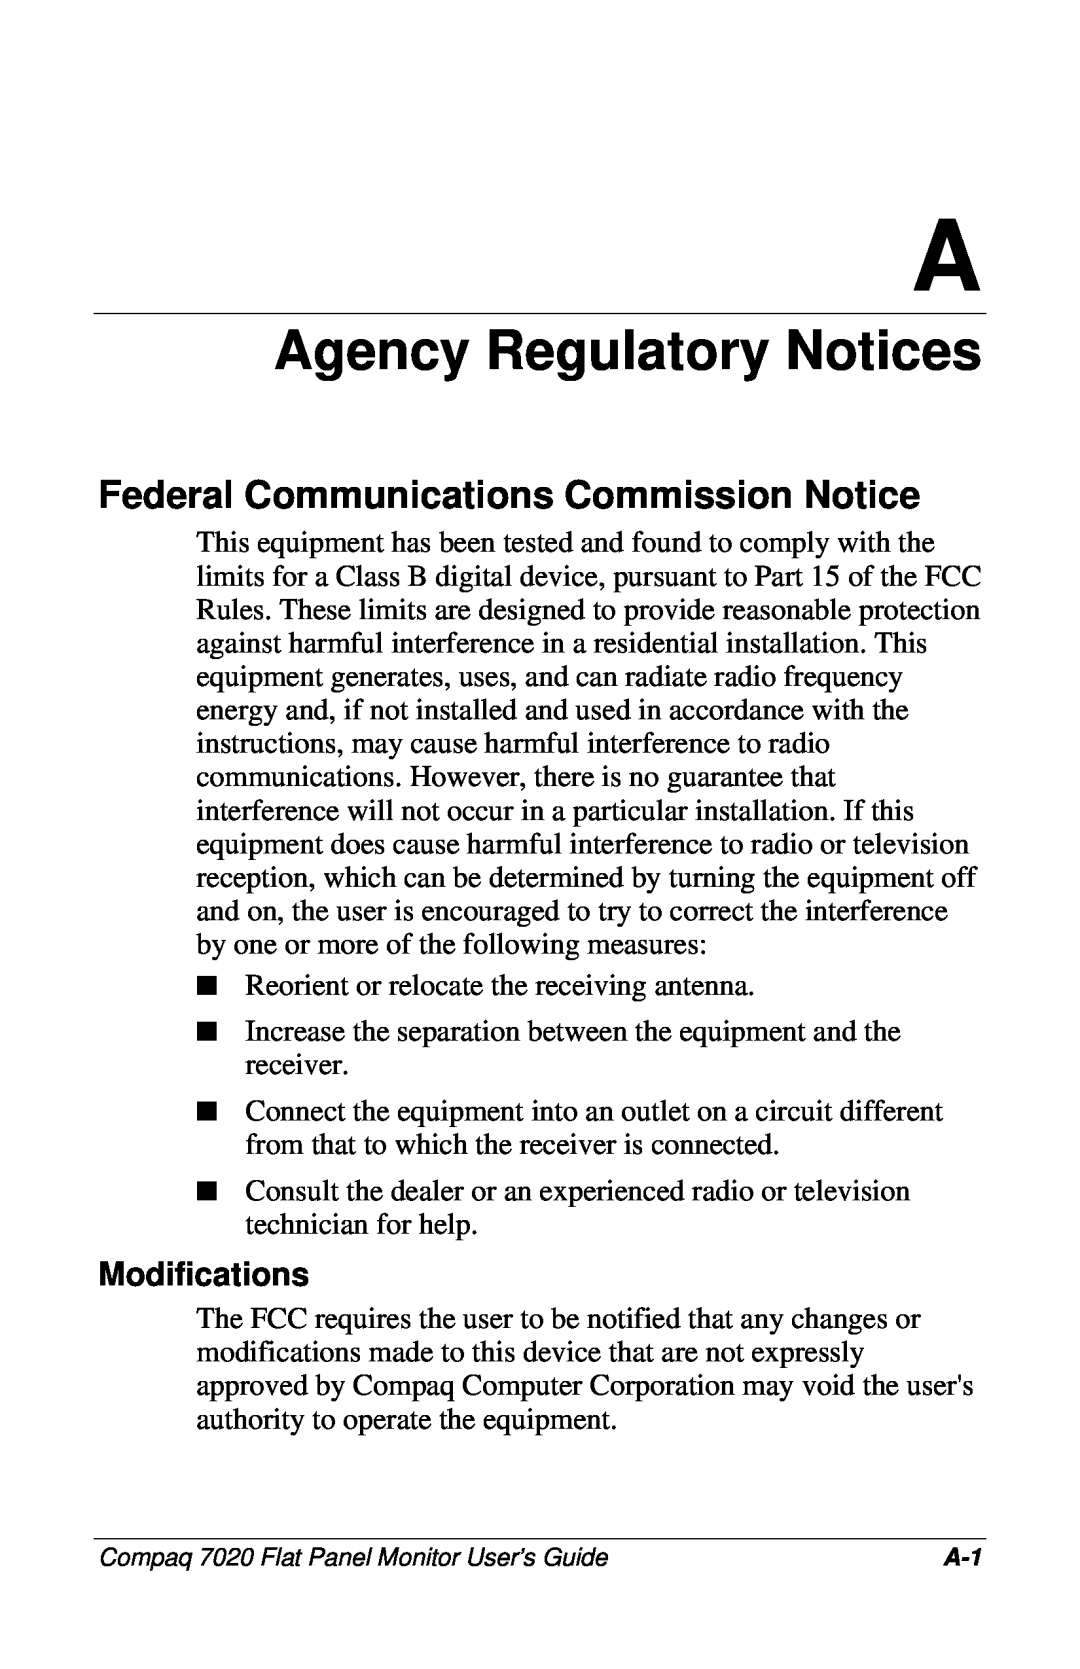 Compaq 7020 manual Agency Regulatory Notices, Federal Communications Commission Notice, Modifications 